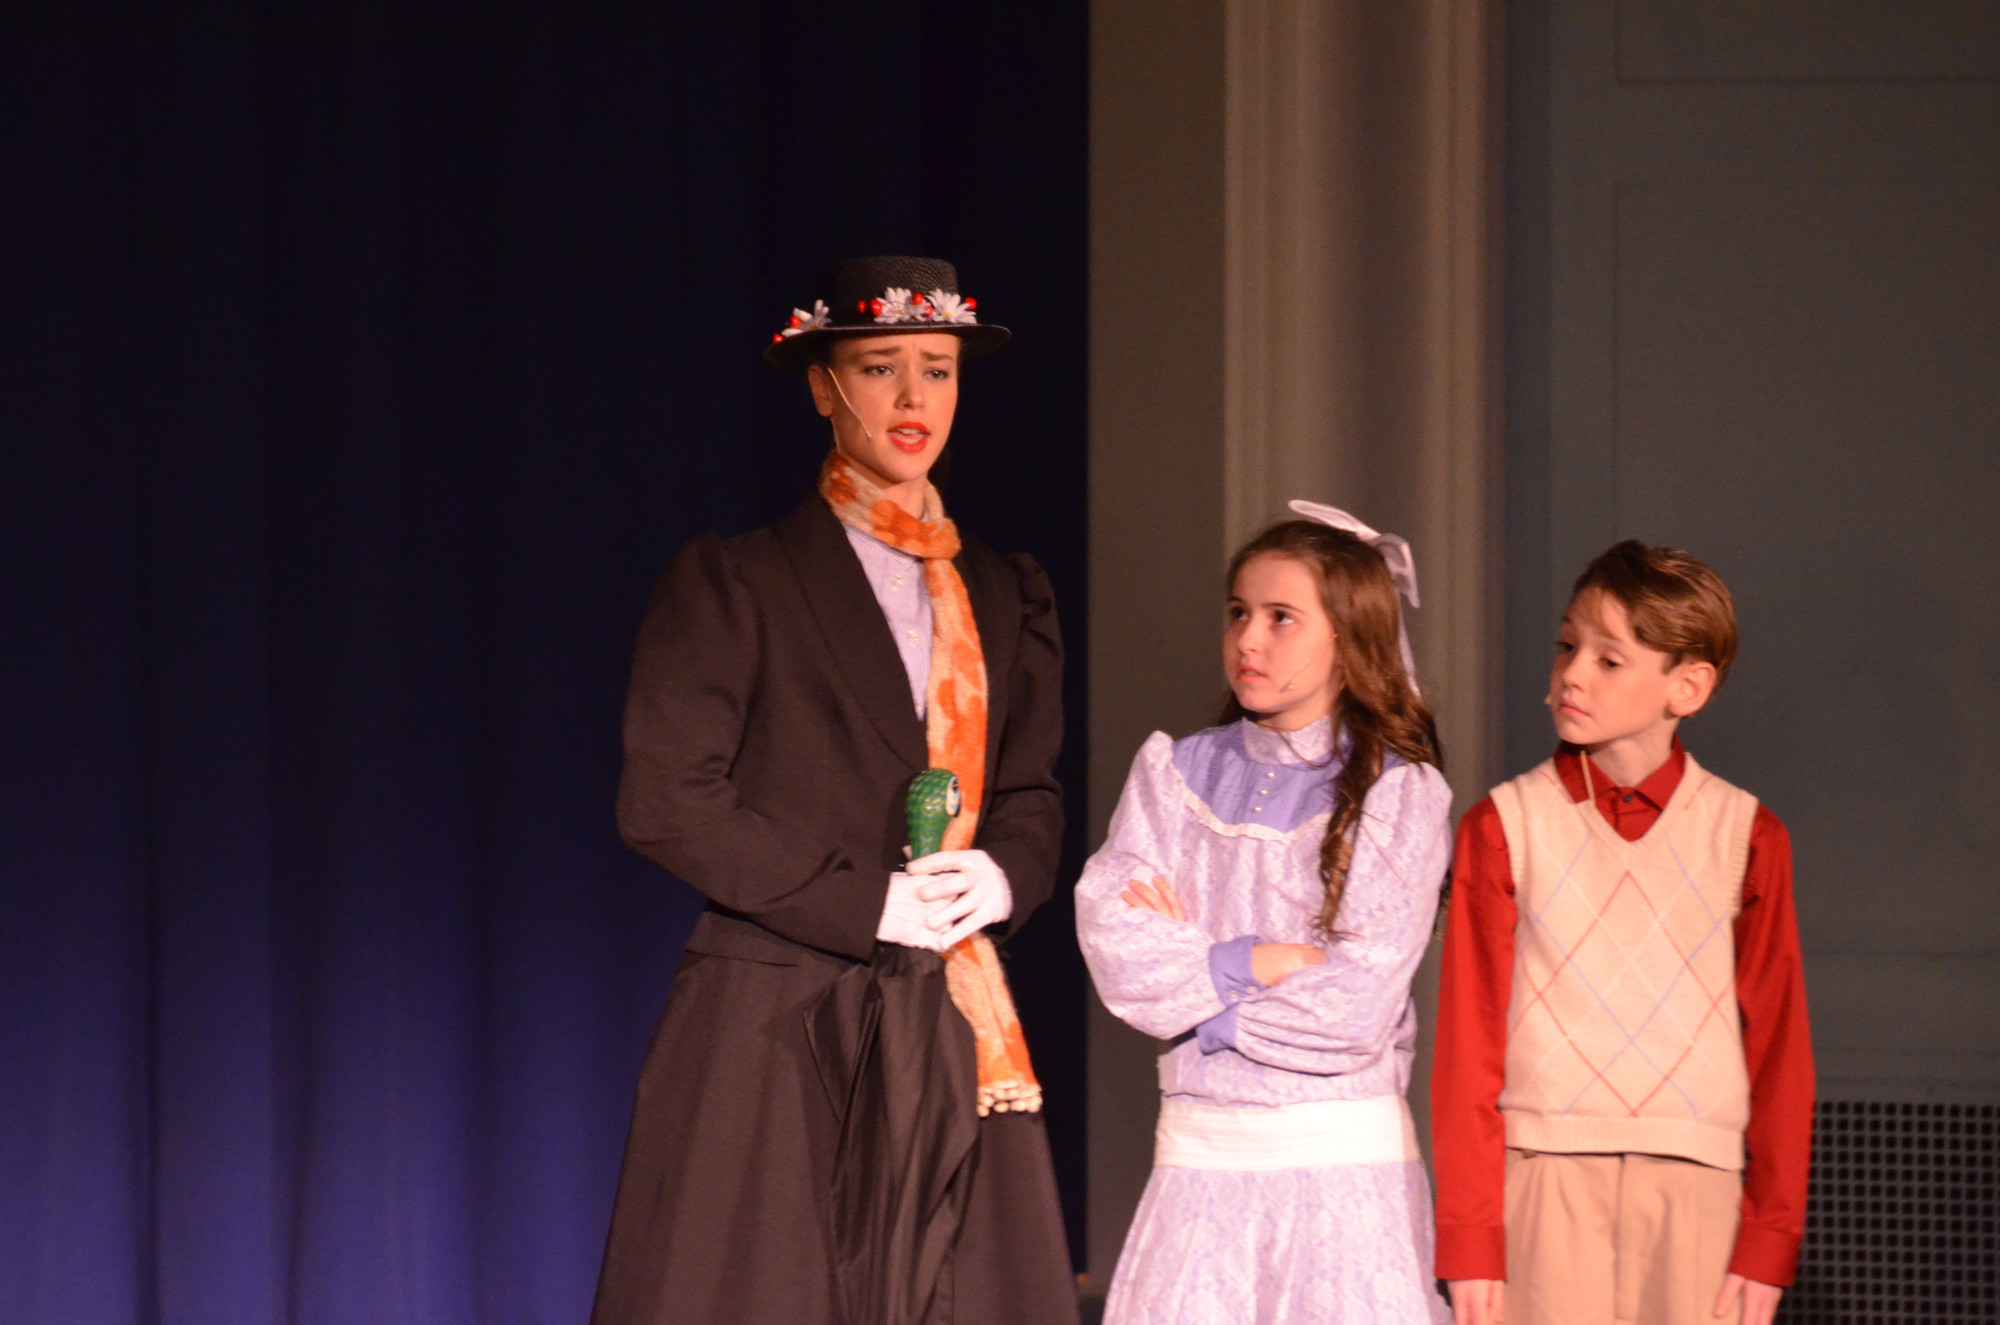 Mary Poppins played by Katharine Calabrese with Jane Banks played by Grace McNally and Michael Banks played by Brennan Donovan.